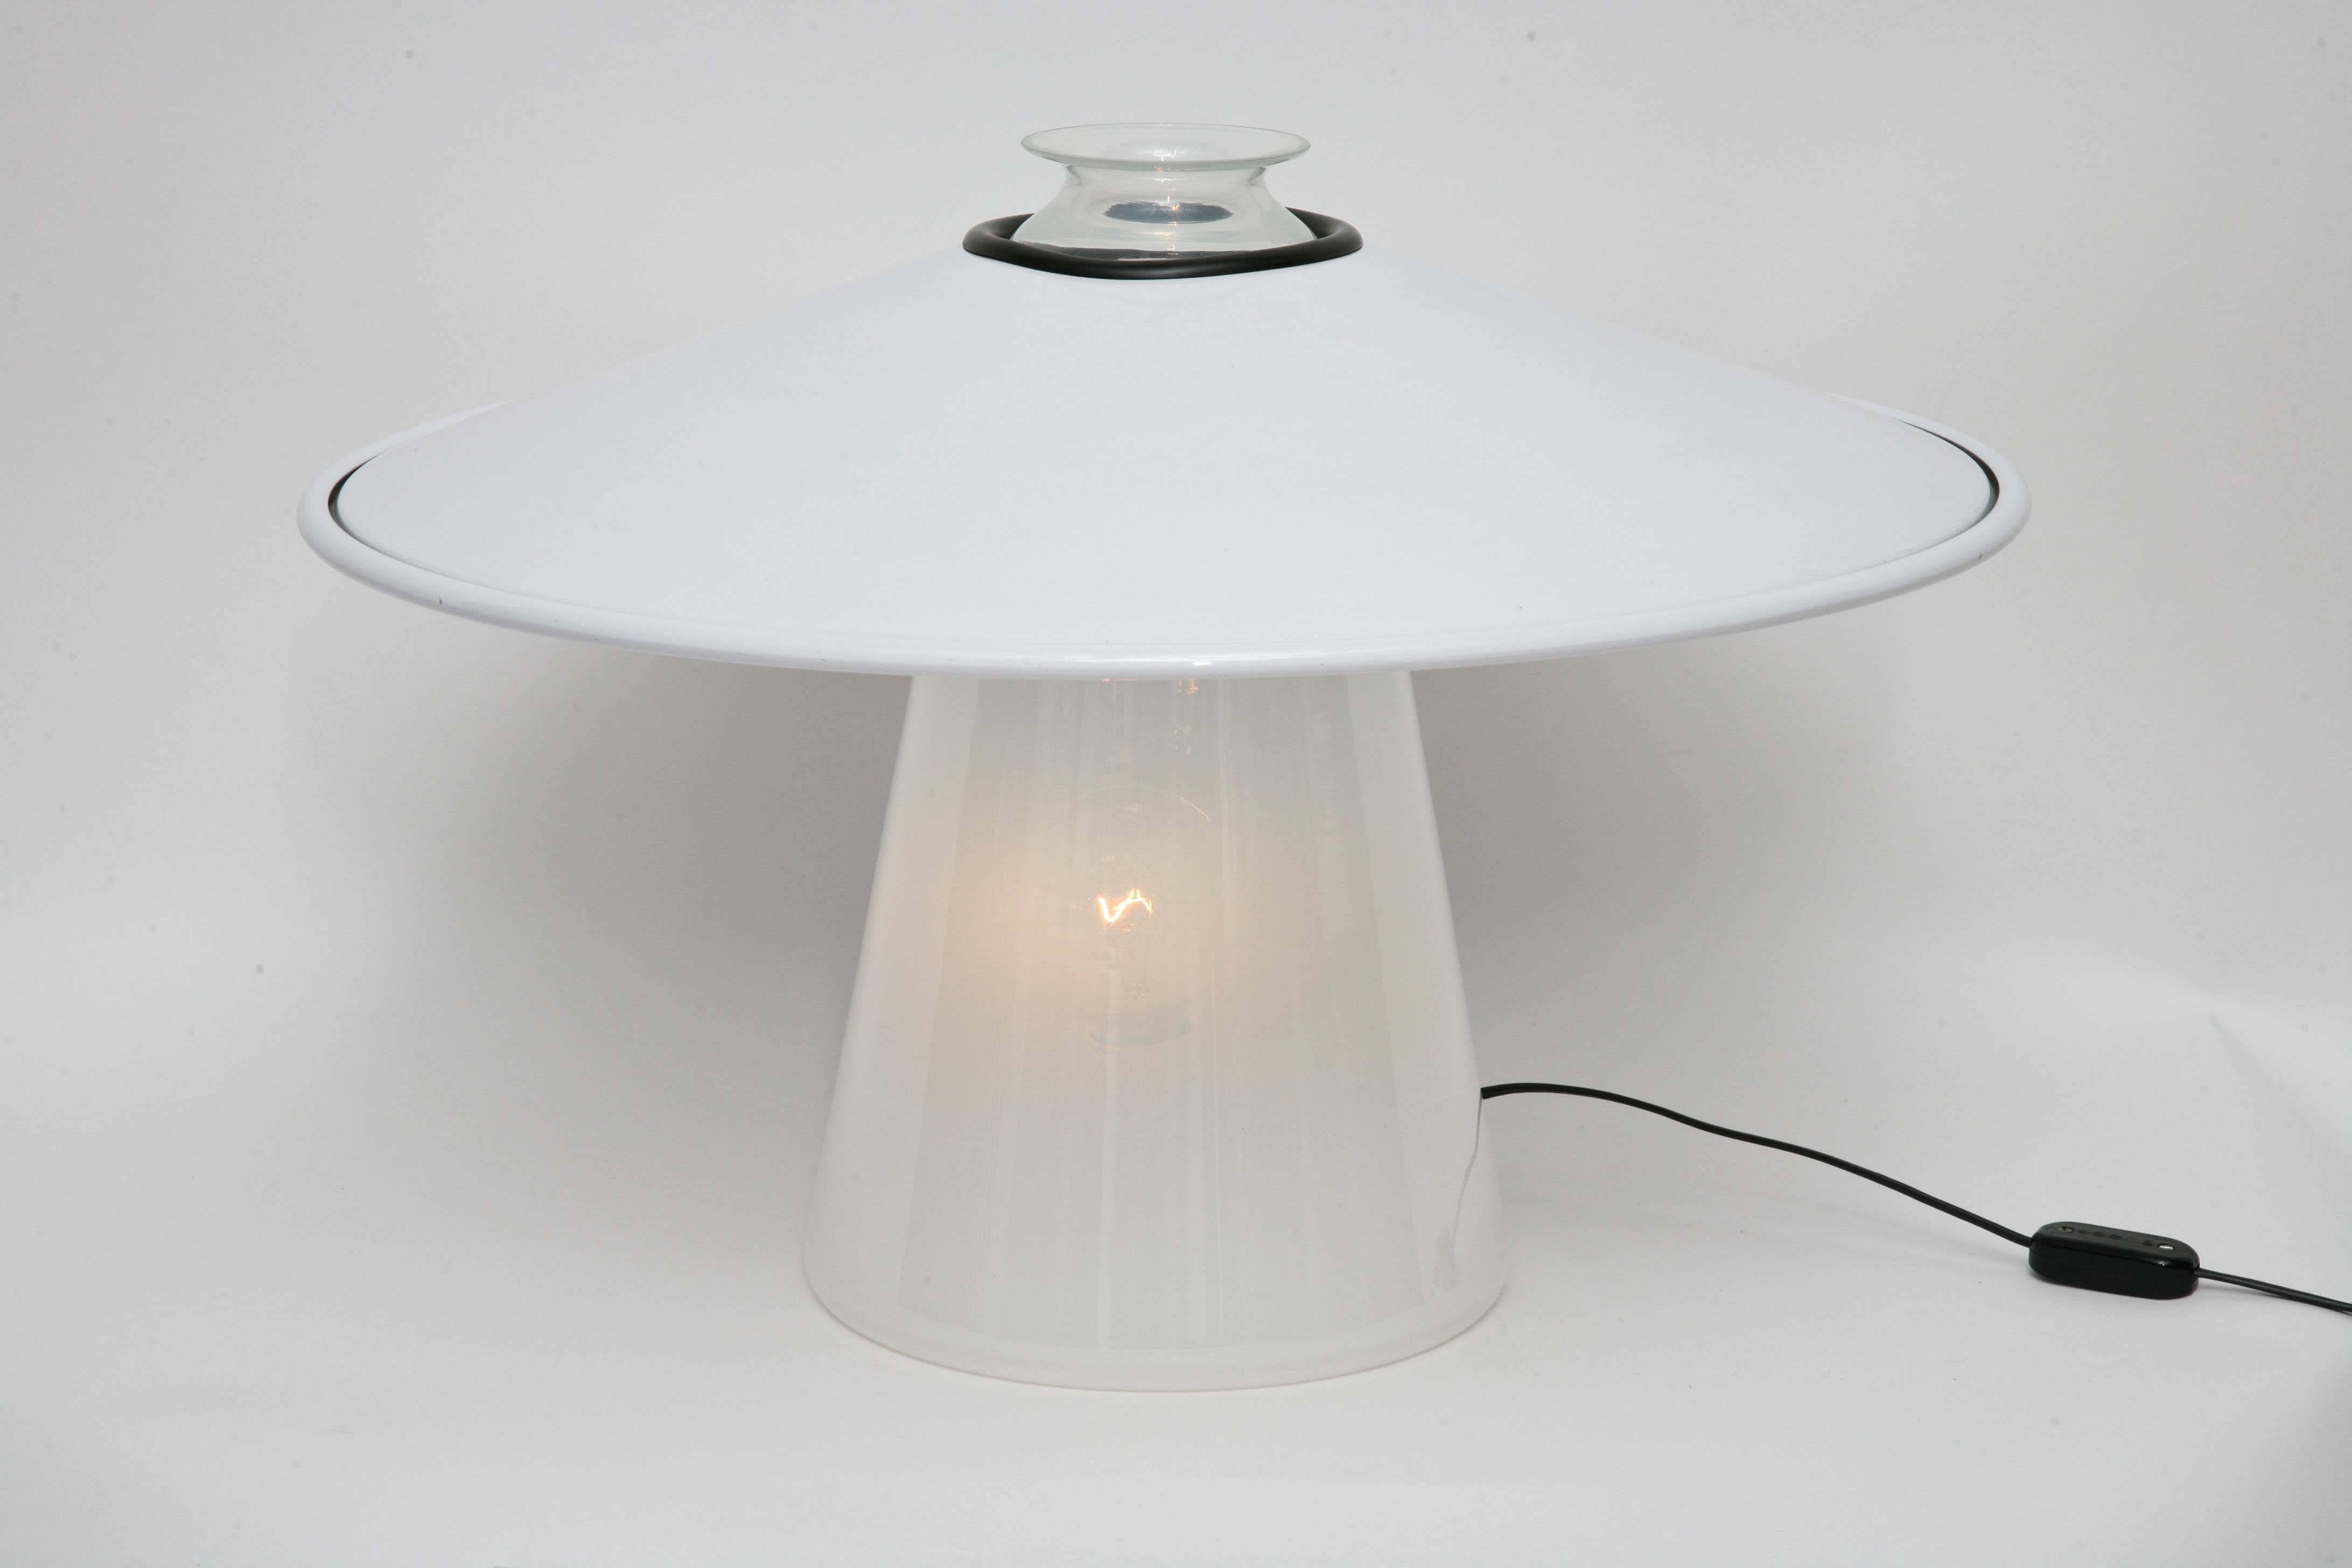 Recalling earlier kerosene lanterns, this 1970s Stilnovo table lamp has a Murano glass body, shading from opaline white at the bottom to nearly clear at the top. The white enameled steel shade has a rubber-ringed opening that fits over the body of